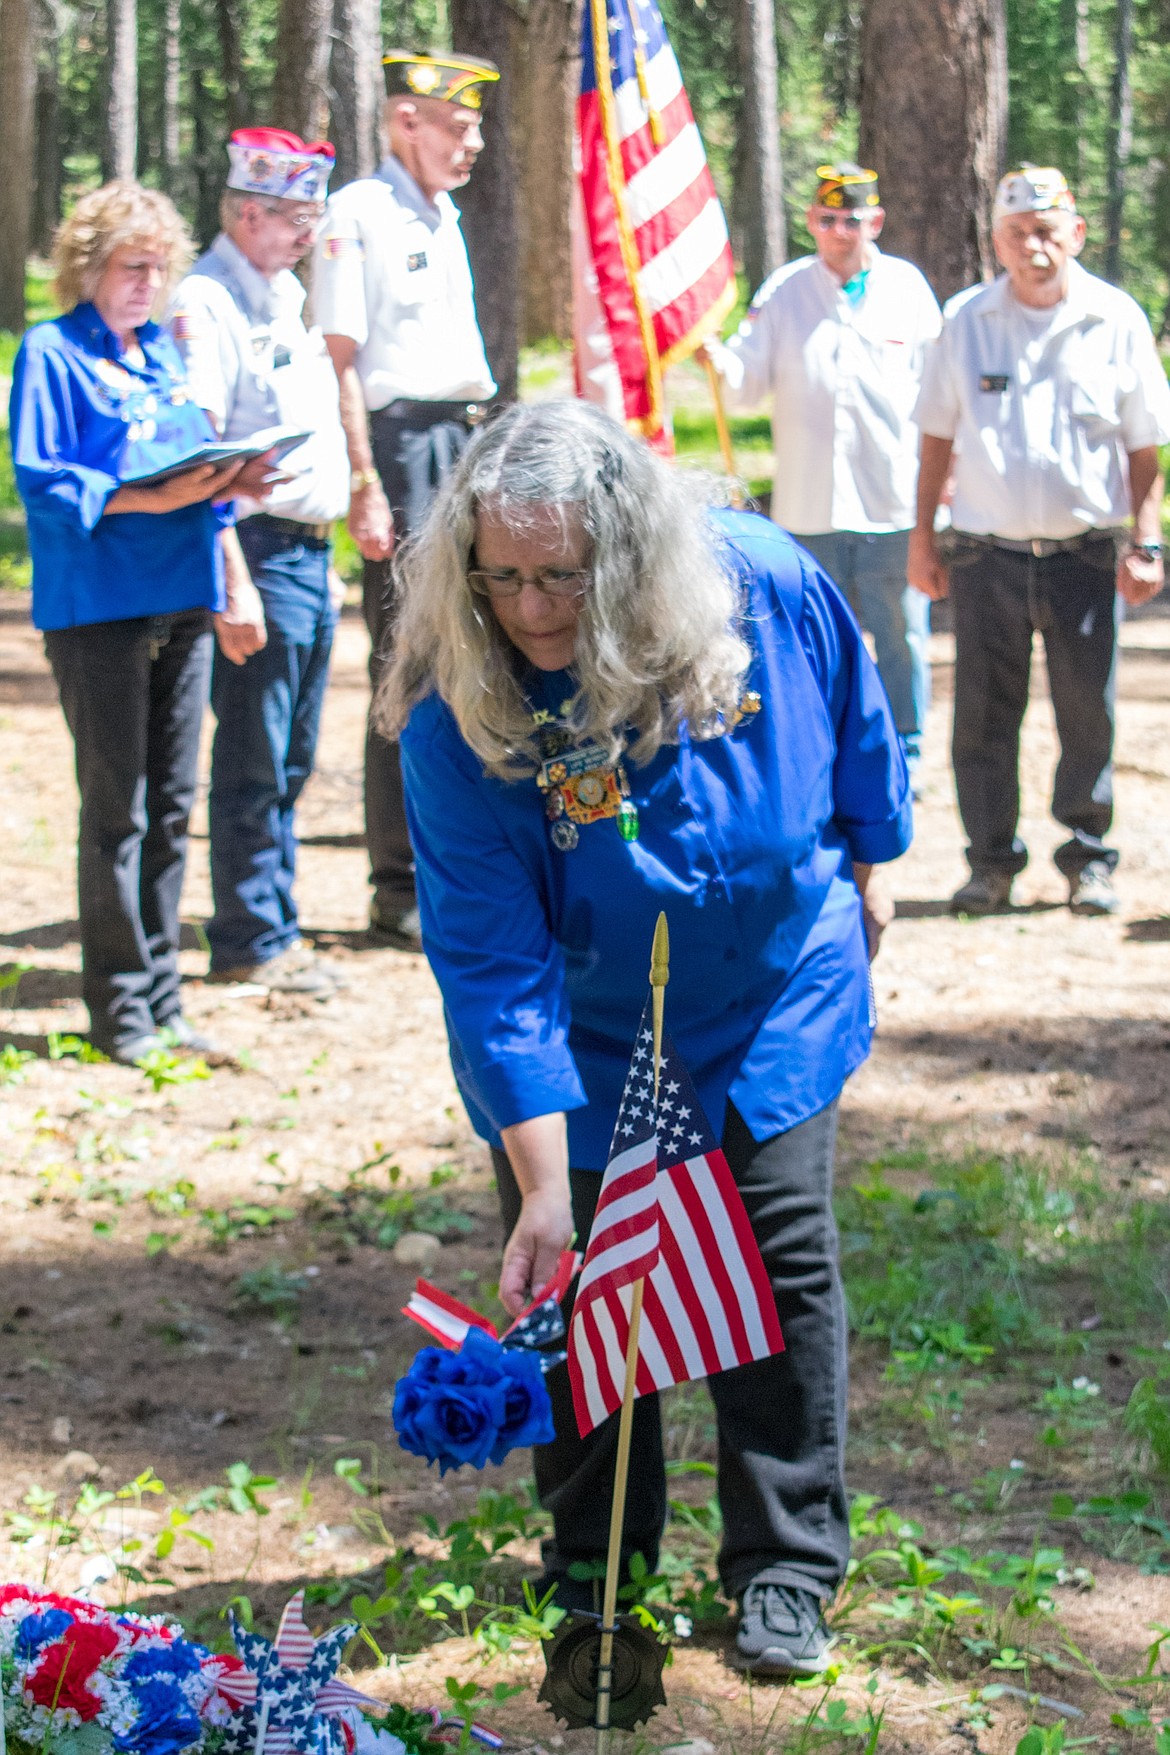 VFW John E. Freeman Post 5514 Auxiliary President Francine Ninneman places blue flowers symbolizing eternity and the immortalization of the deeds of deceased service members during the Memorial Day Service Monday at Boyd Cemetery in the Yaak. (Ben Kibbey/The Western News)